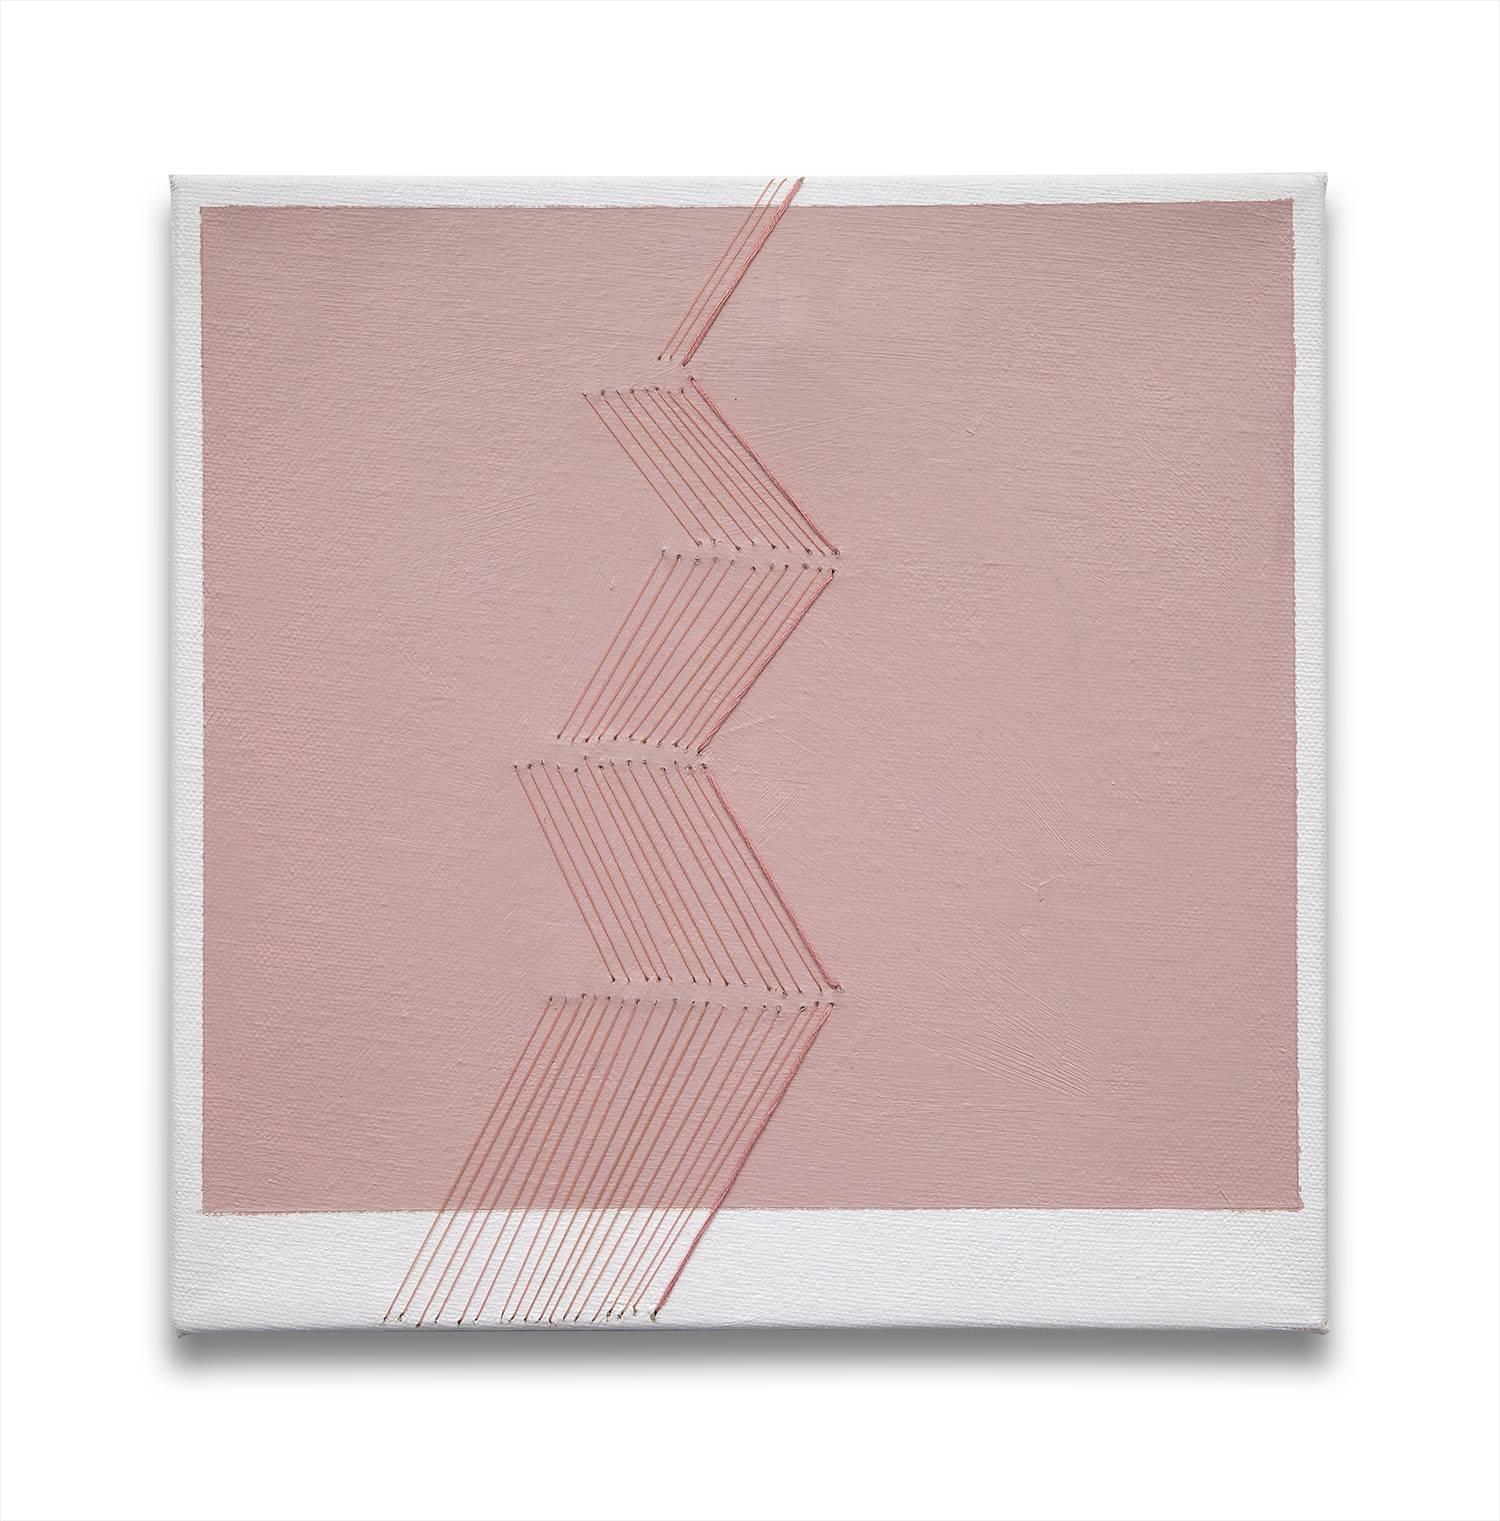 Twist 2 (Abstract Painting)

Acrylic, graphite and thread on canvas - Unframed

The threaded lines suggest a physical barrier that interrupts the shapes and stops them from connecting and at the same time a transparency is created that allows the